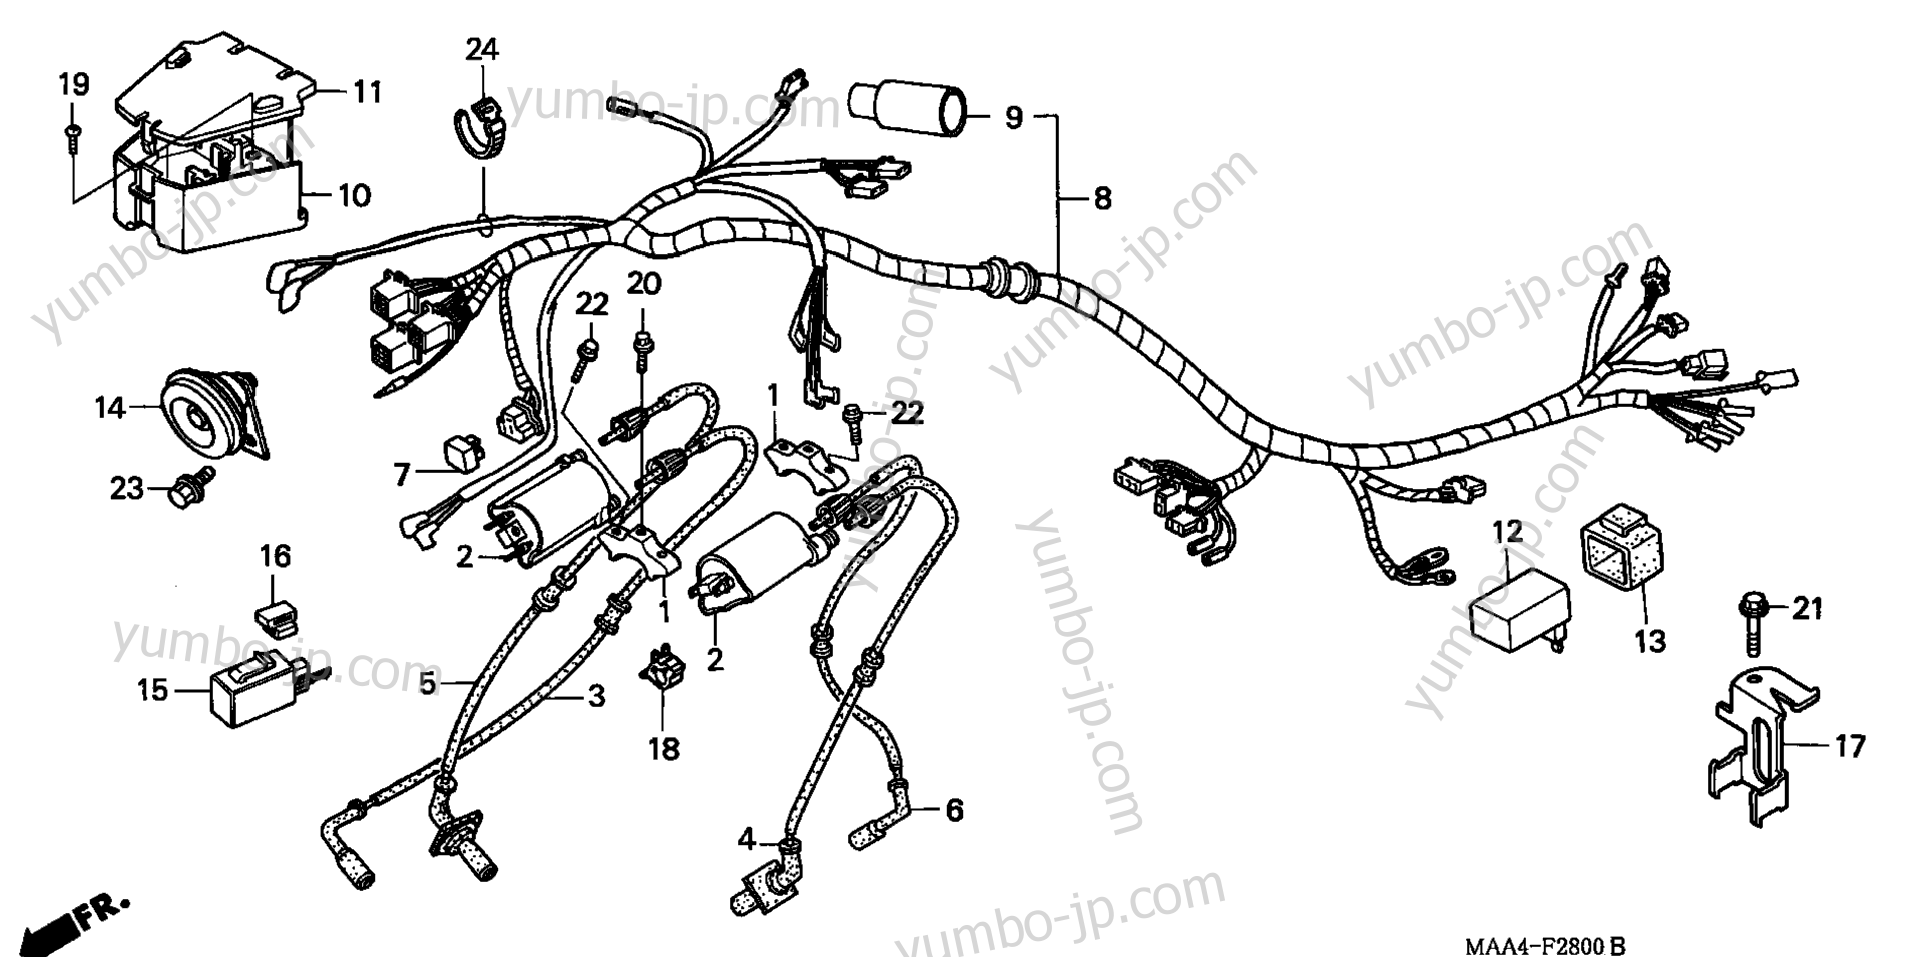 WIRE HARNESS (1) for motorcycles HONDA VT1100C A 2000 year